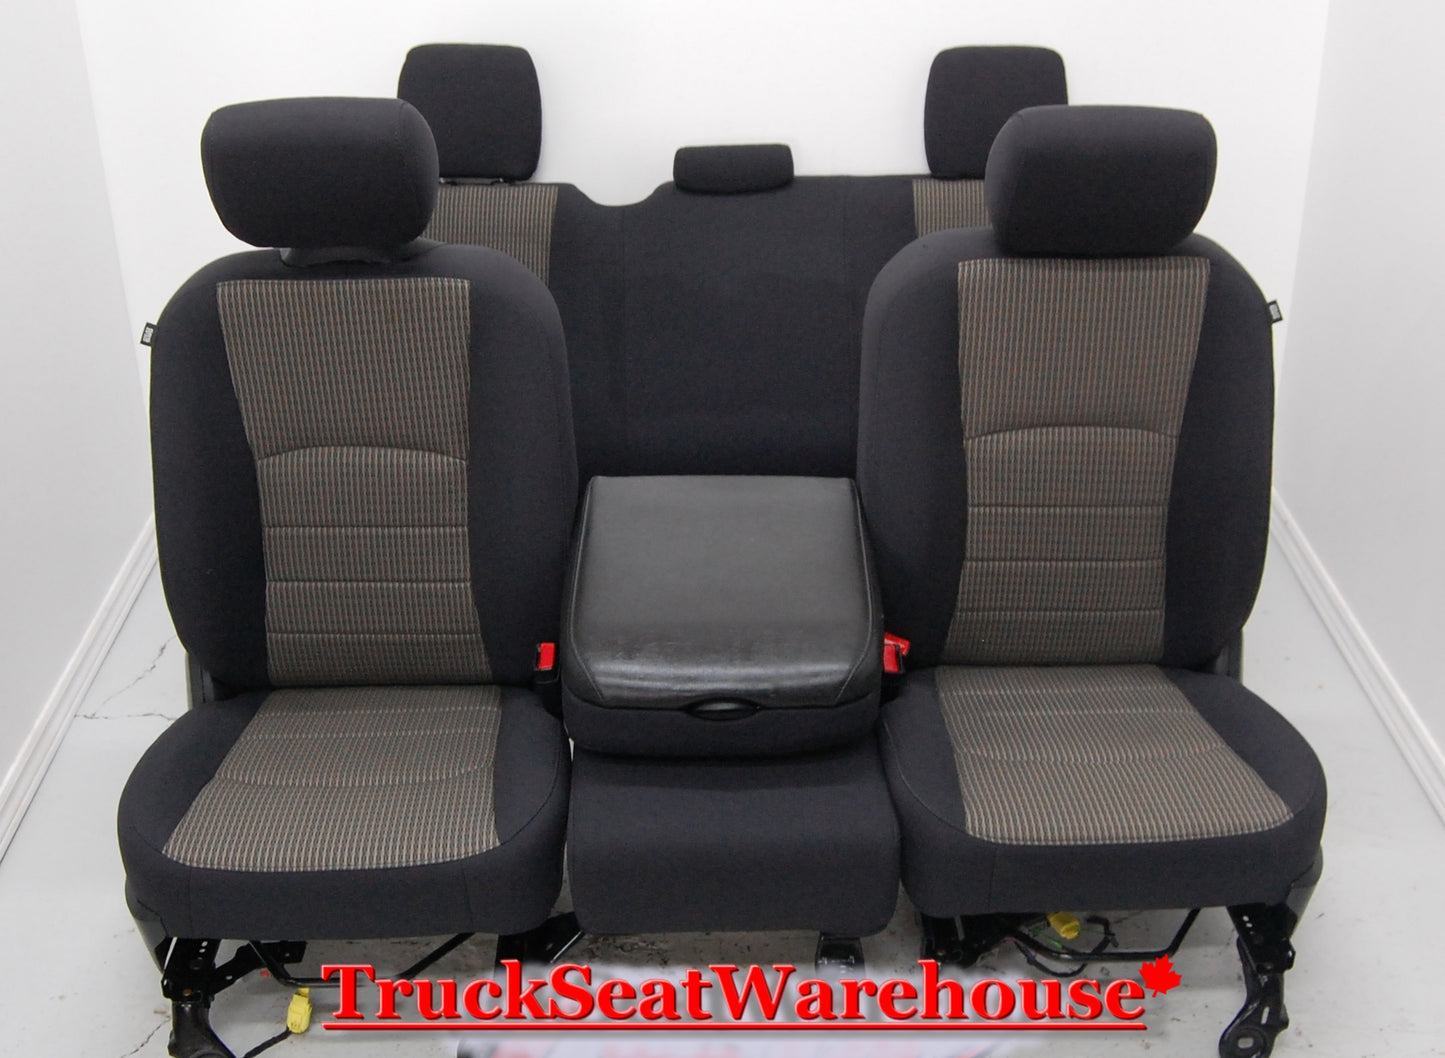 Black and Tan cloth front and rear seats and center console from a 2012 Dodge Ram Quad cab Truck .